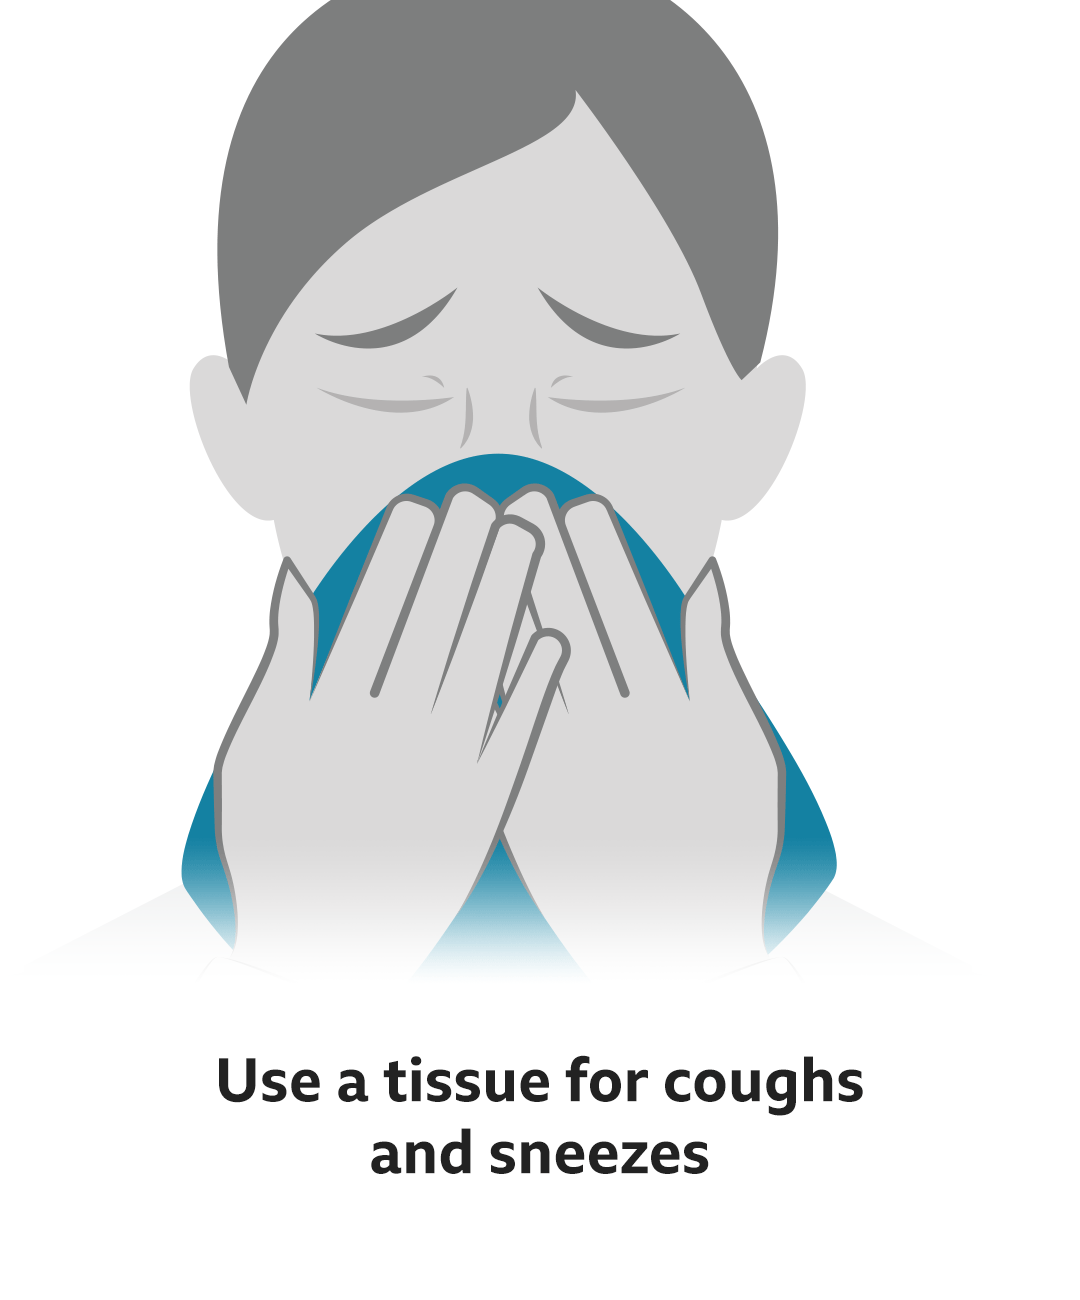 Use tissue for coughs and sneezes